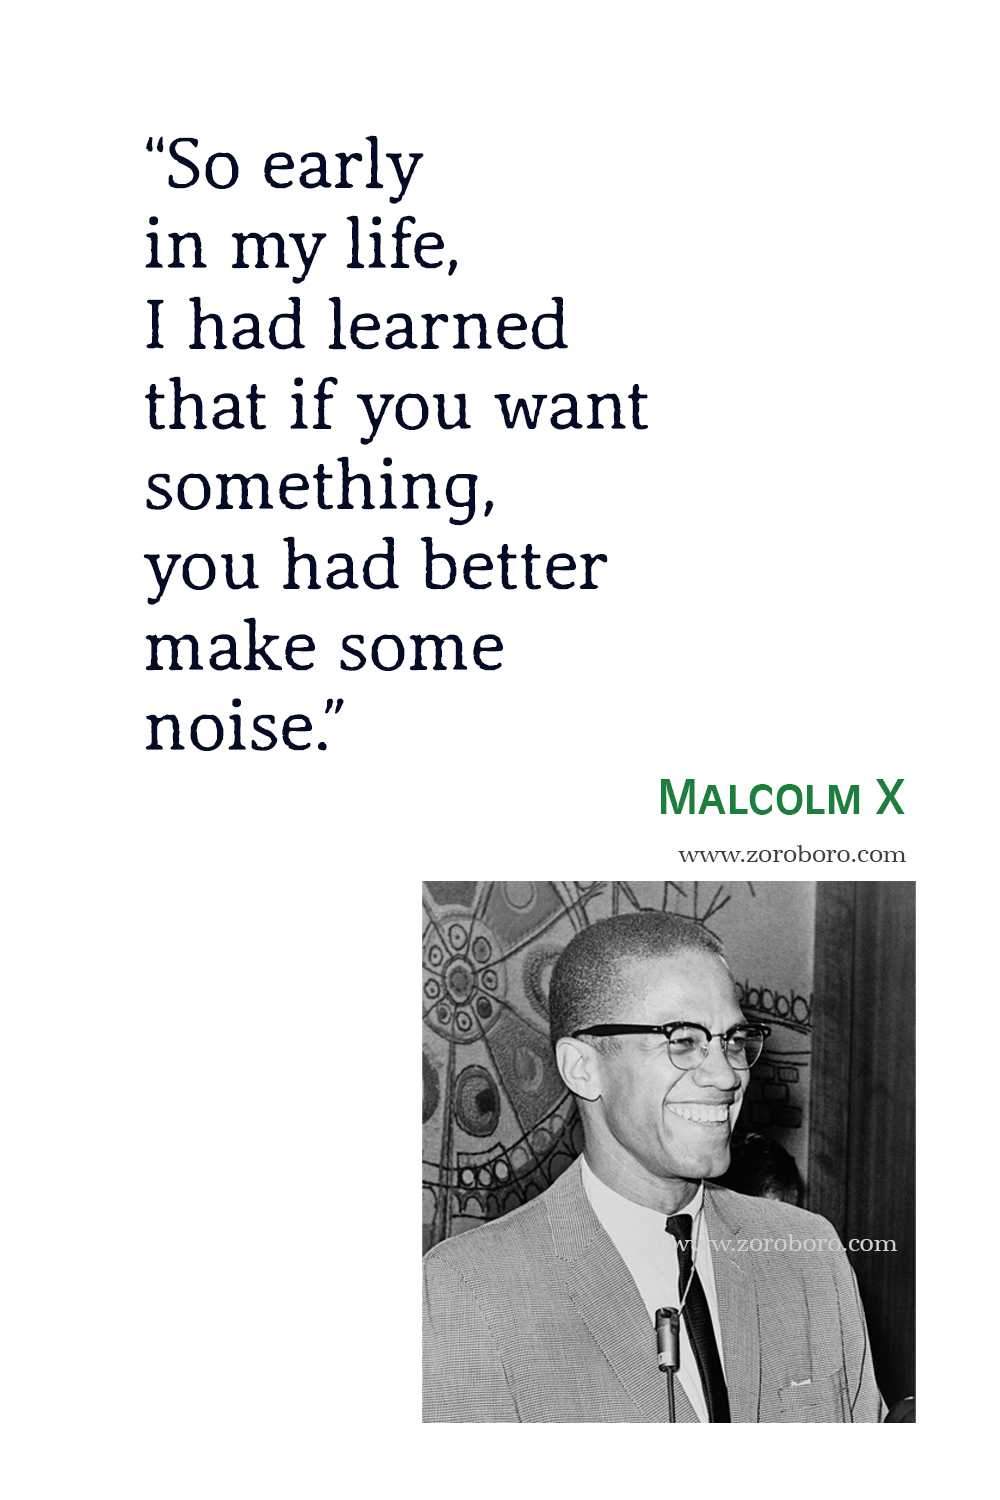 Malcolm X Quotes, The Autobiography of Malcolm X Quotes, Malcolm X Education, Reading, Inspirational, Justice, Respect Quotes. Malcolm X